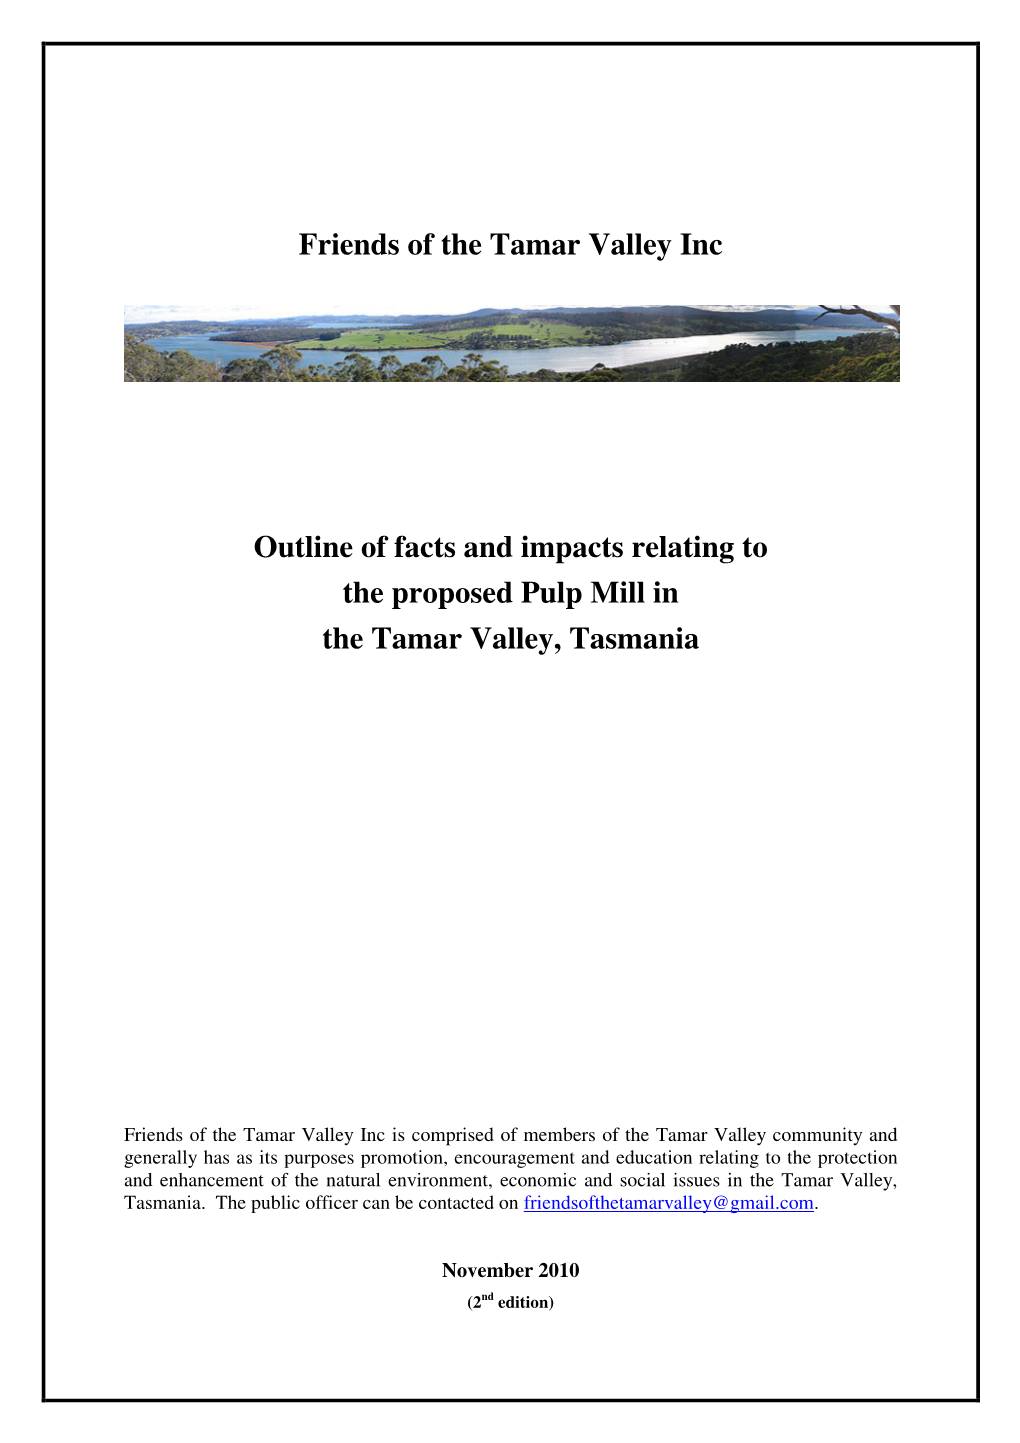 Friends of the Tamar Valley Inc Outline of Facts and Impacts Relating to the Proposed Pulp Mill in the Tamar Valley, Tasmania